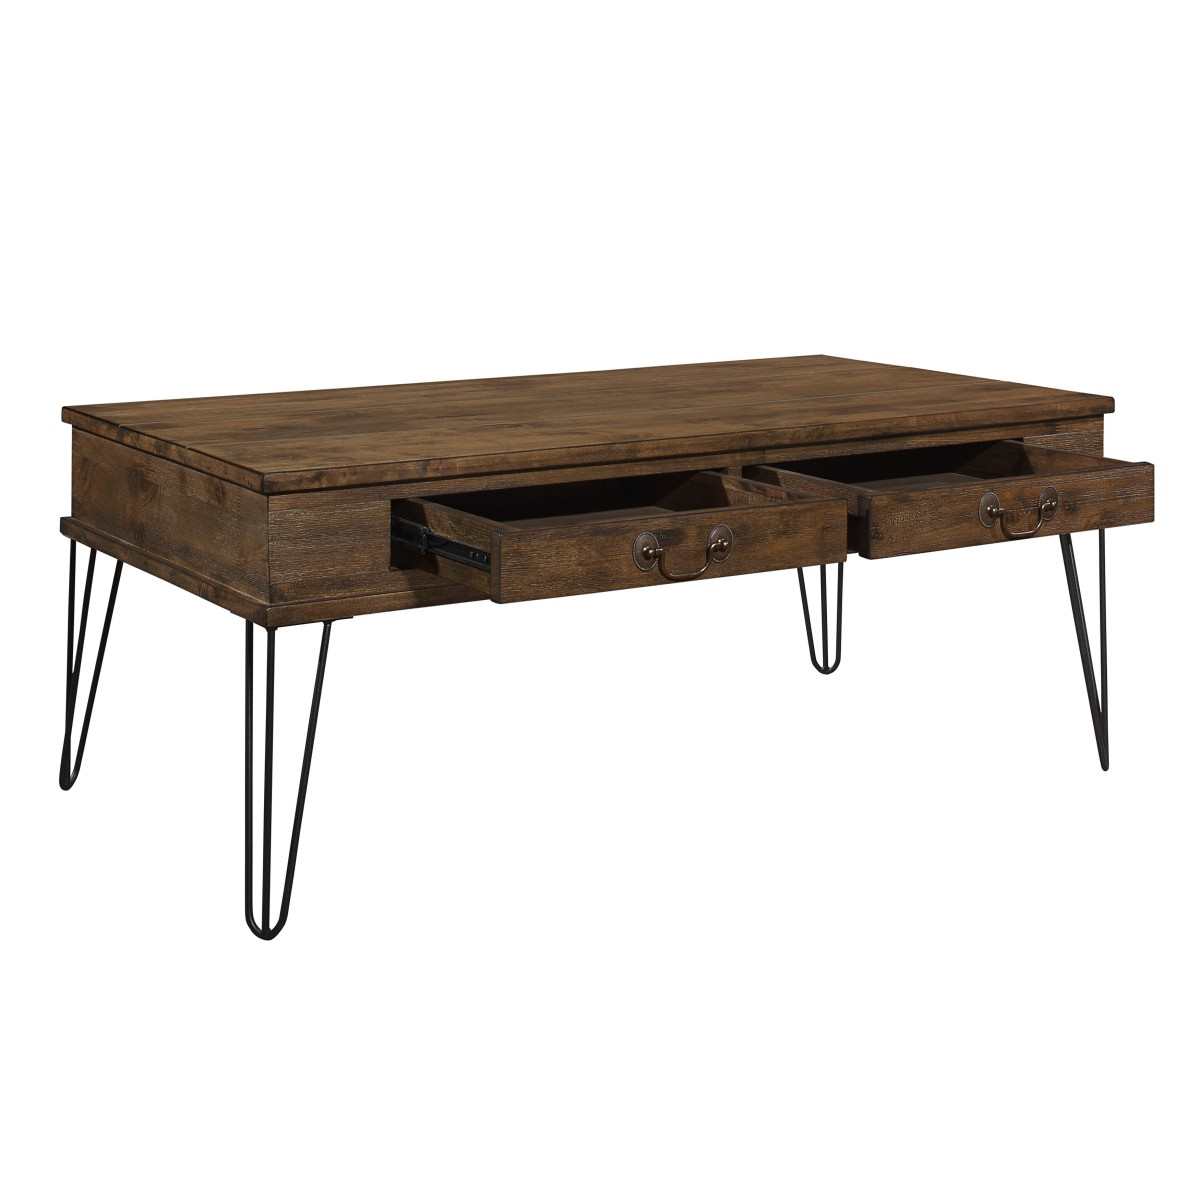 Shaffner Rectangular Coffee Table Collection 3670M